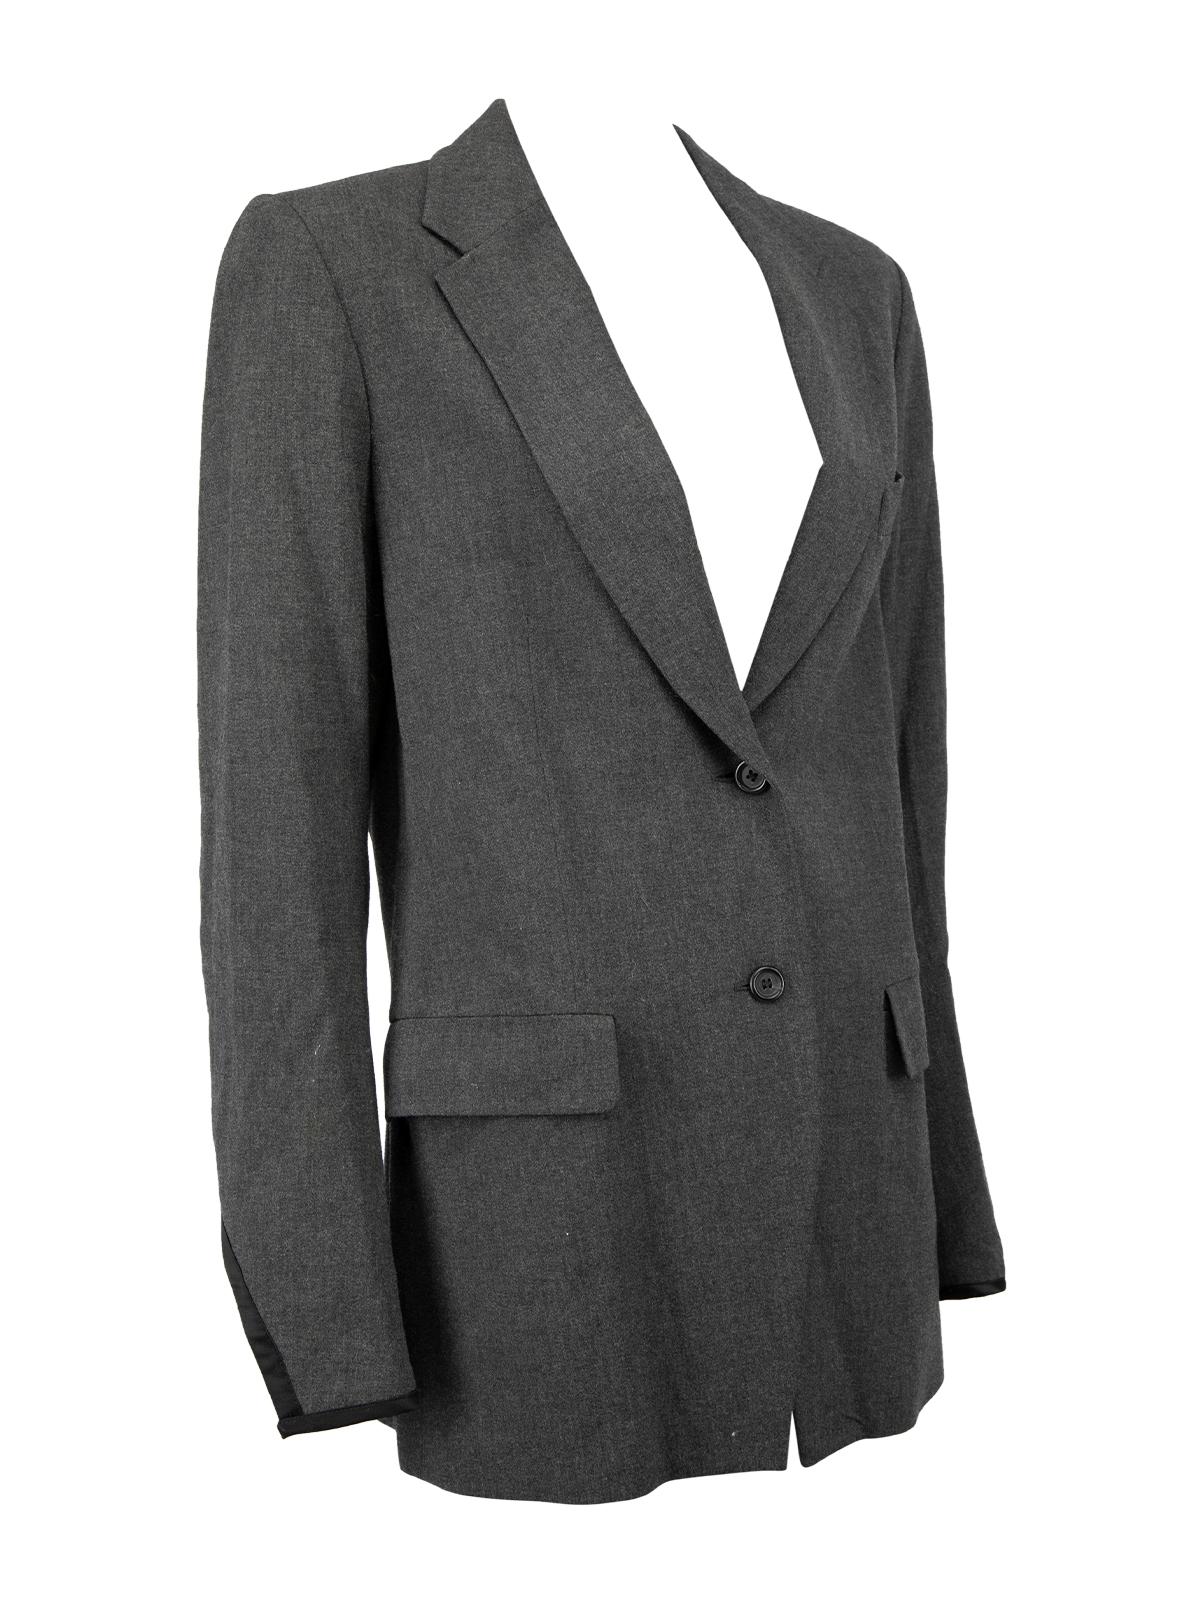 CONDITION is Very good. Hardly any visible wear to blazer is evident on this used Dries Van Noten designer resale item. Details Grey Wool, rayon blend Blazer Relaxed fit Long sleeves Round collar Double button front closure 2x Front pockets Cuff cut